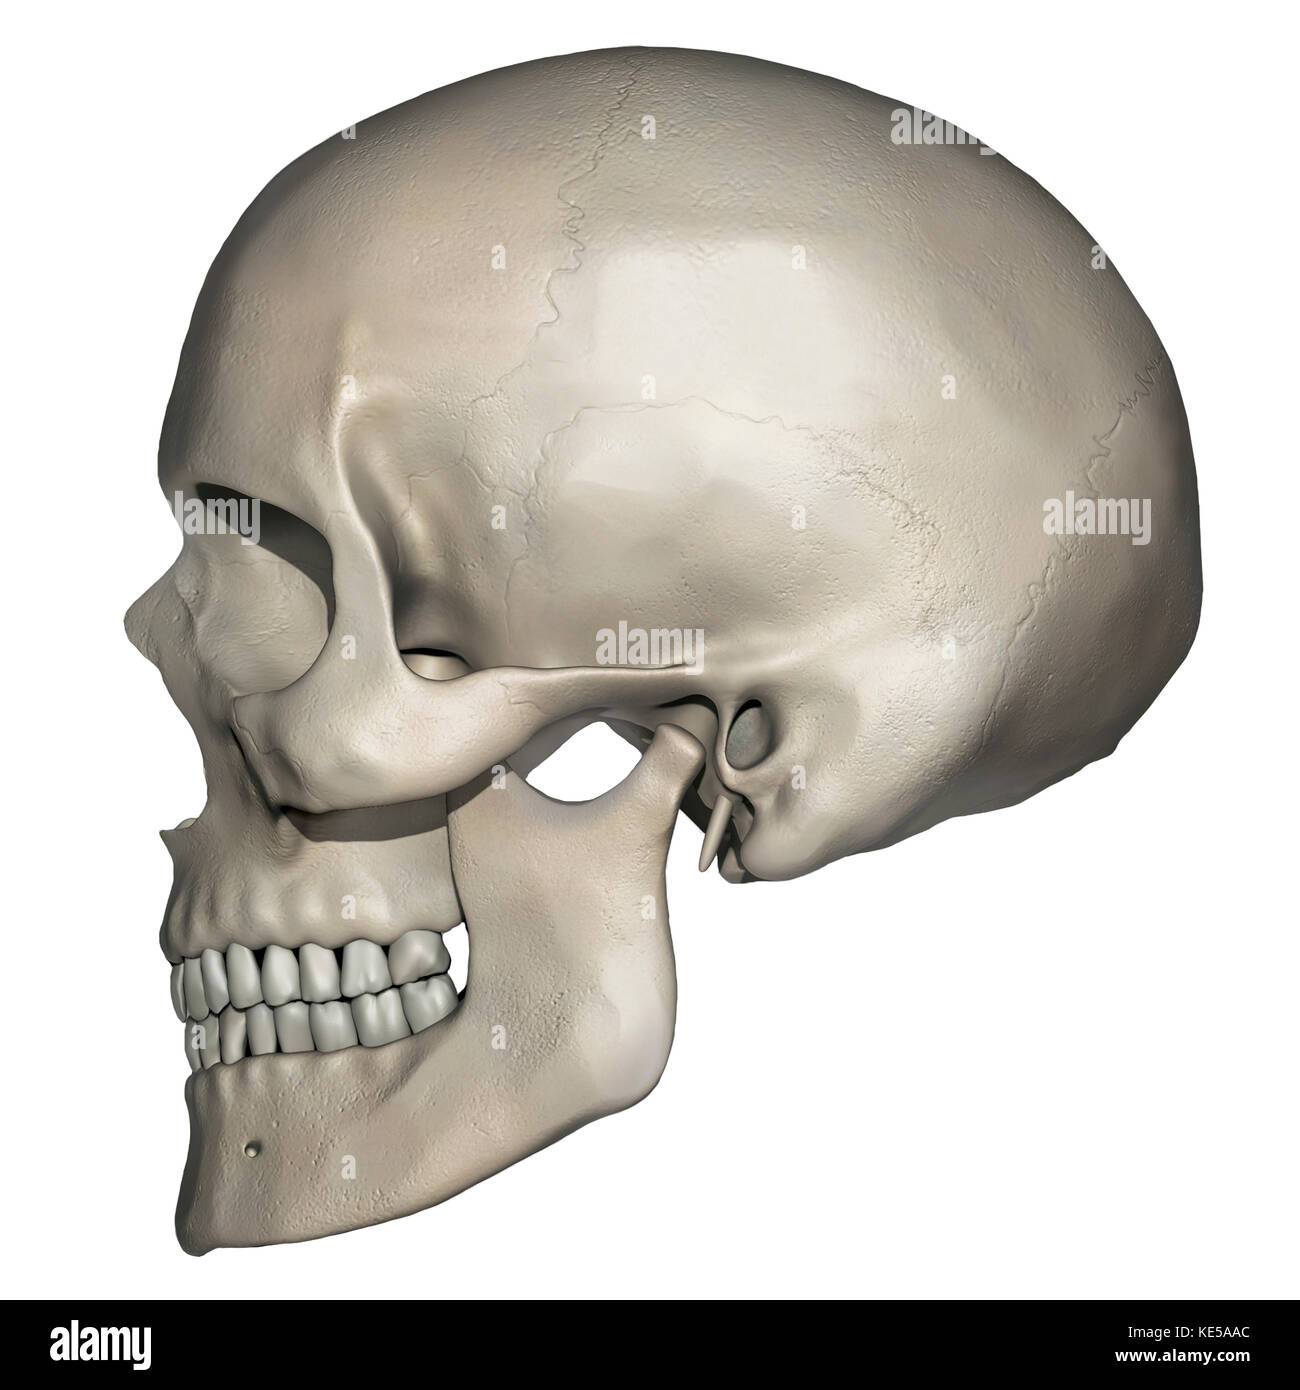 Lateral view of human skull anatomy. Stock Photo